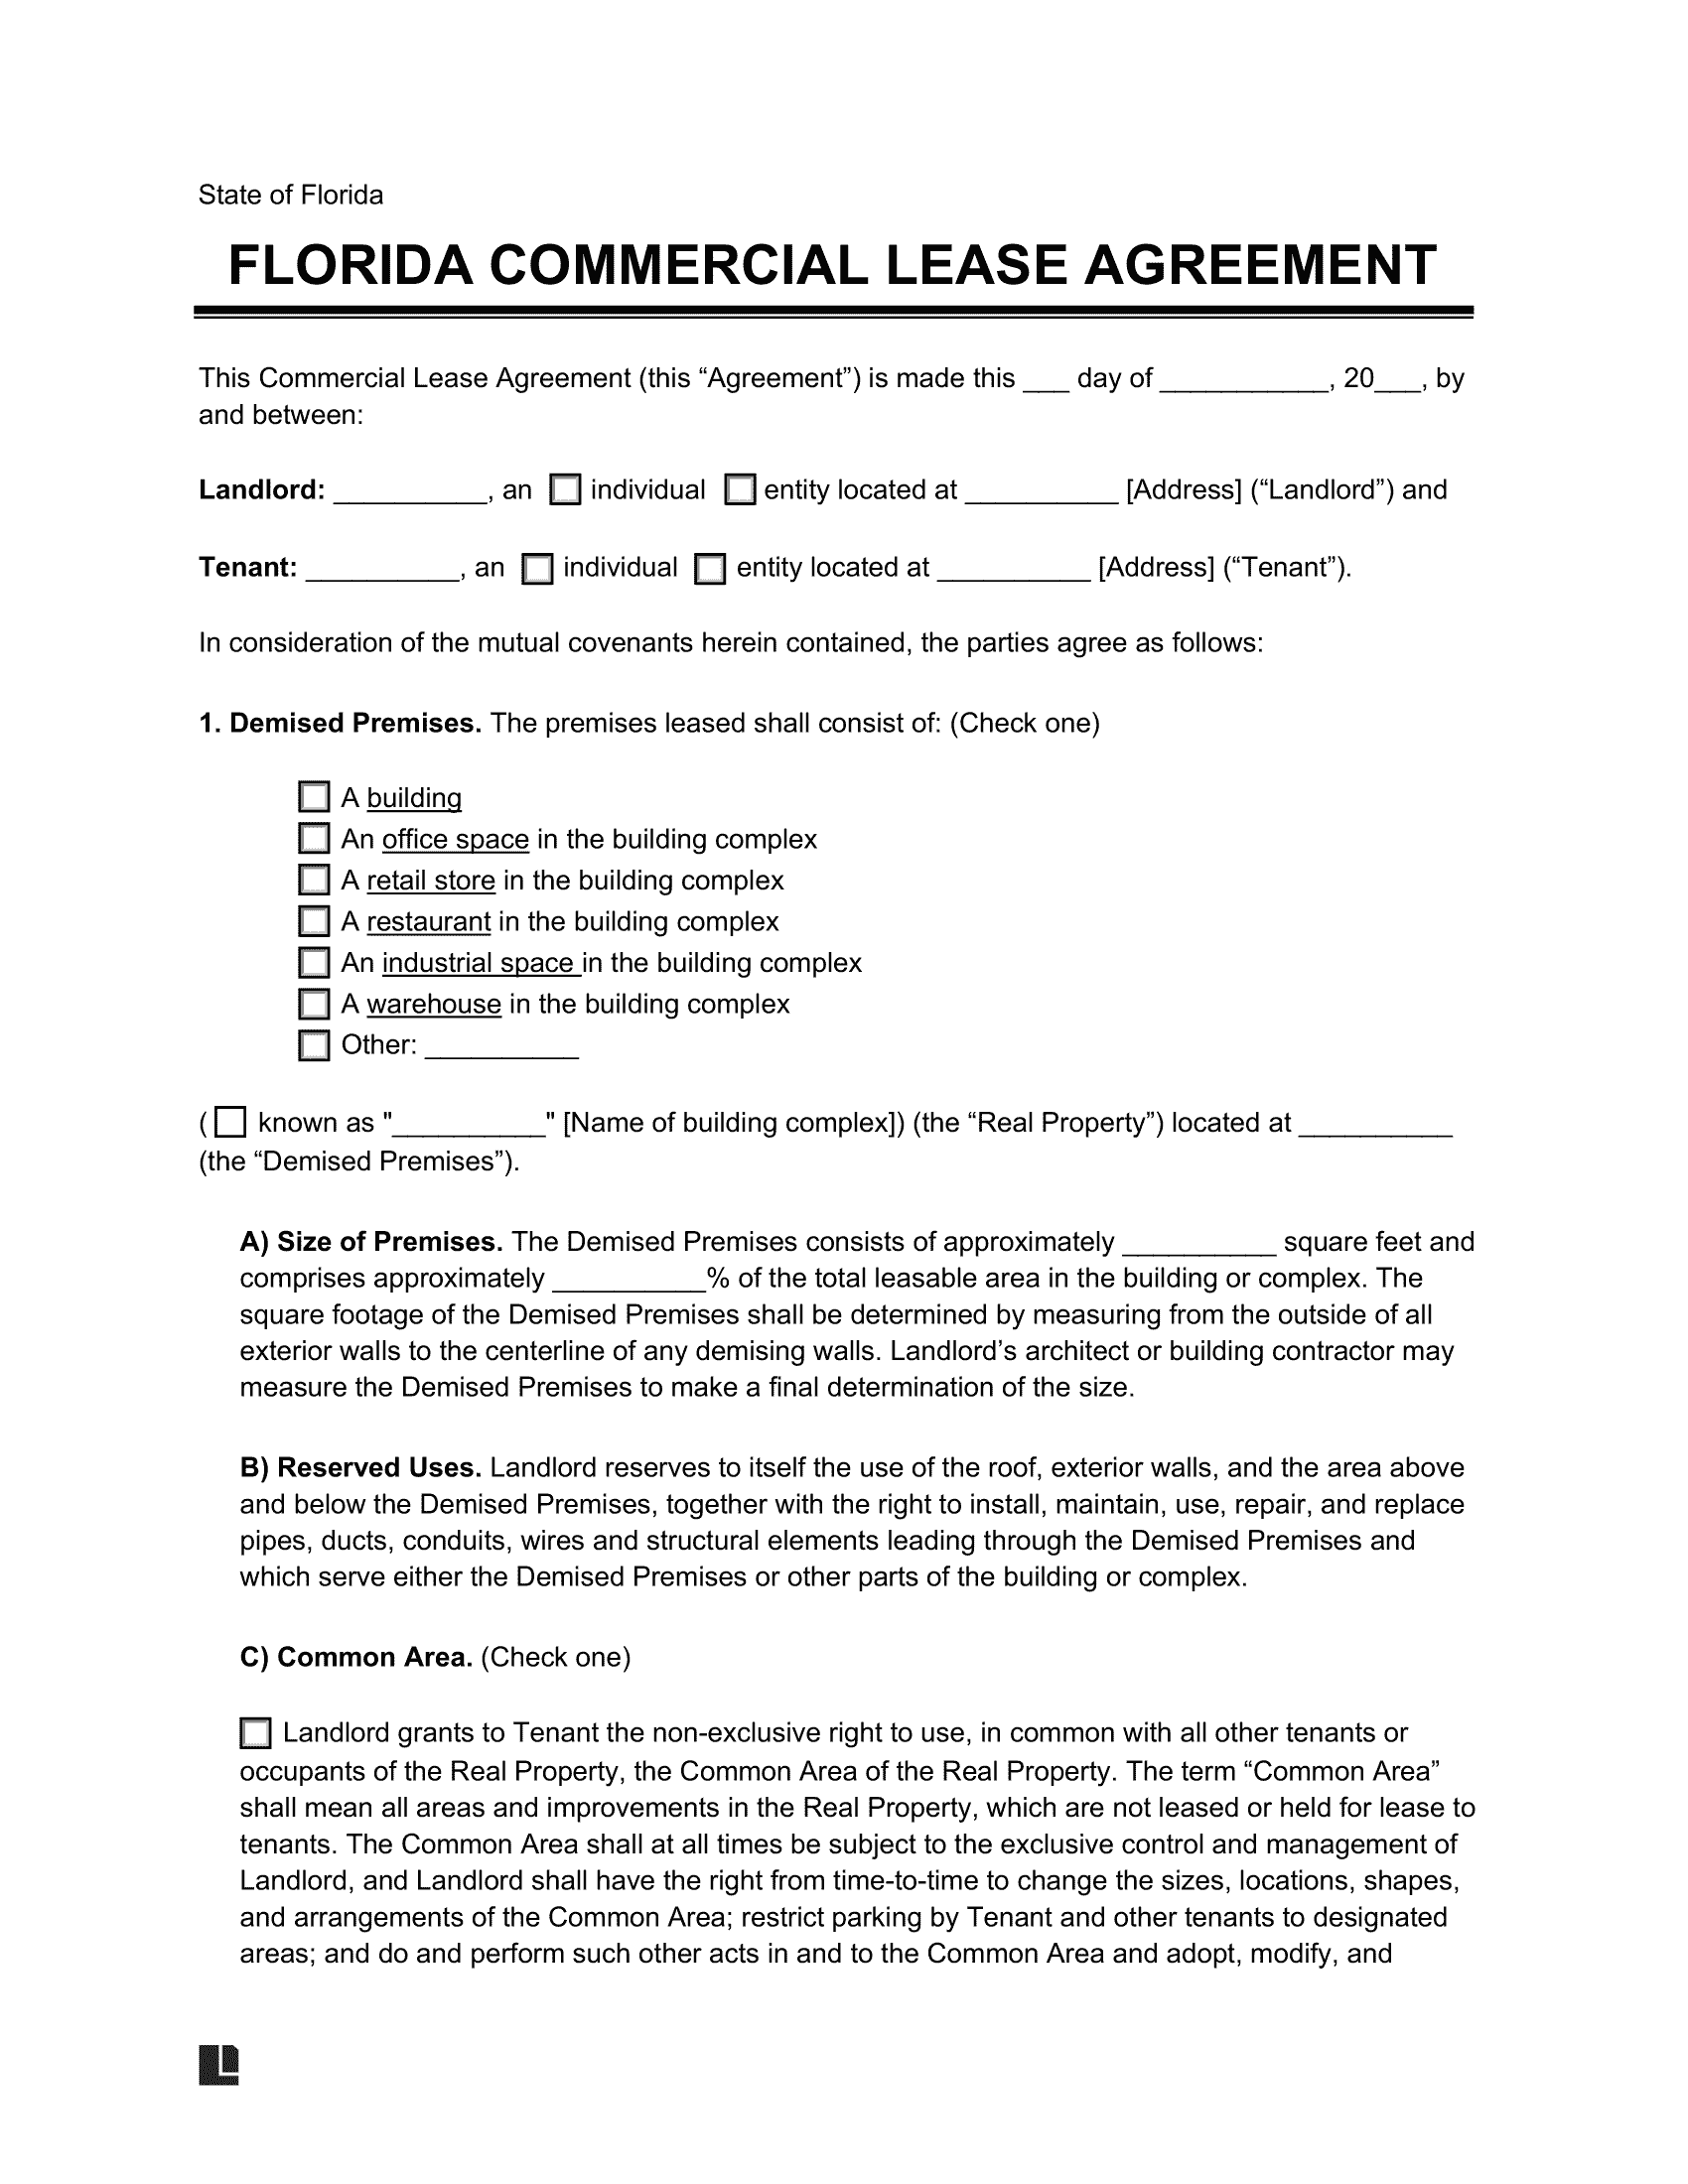 Florida Commercial Lease Agreement